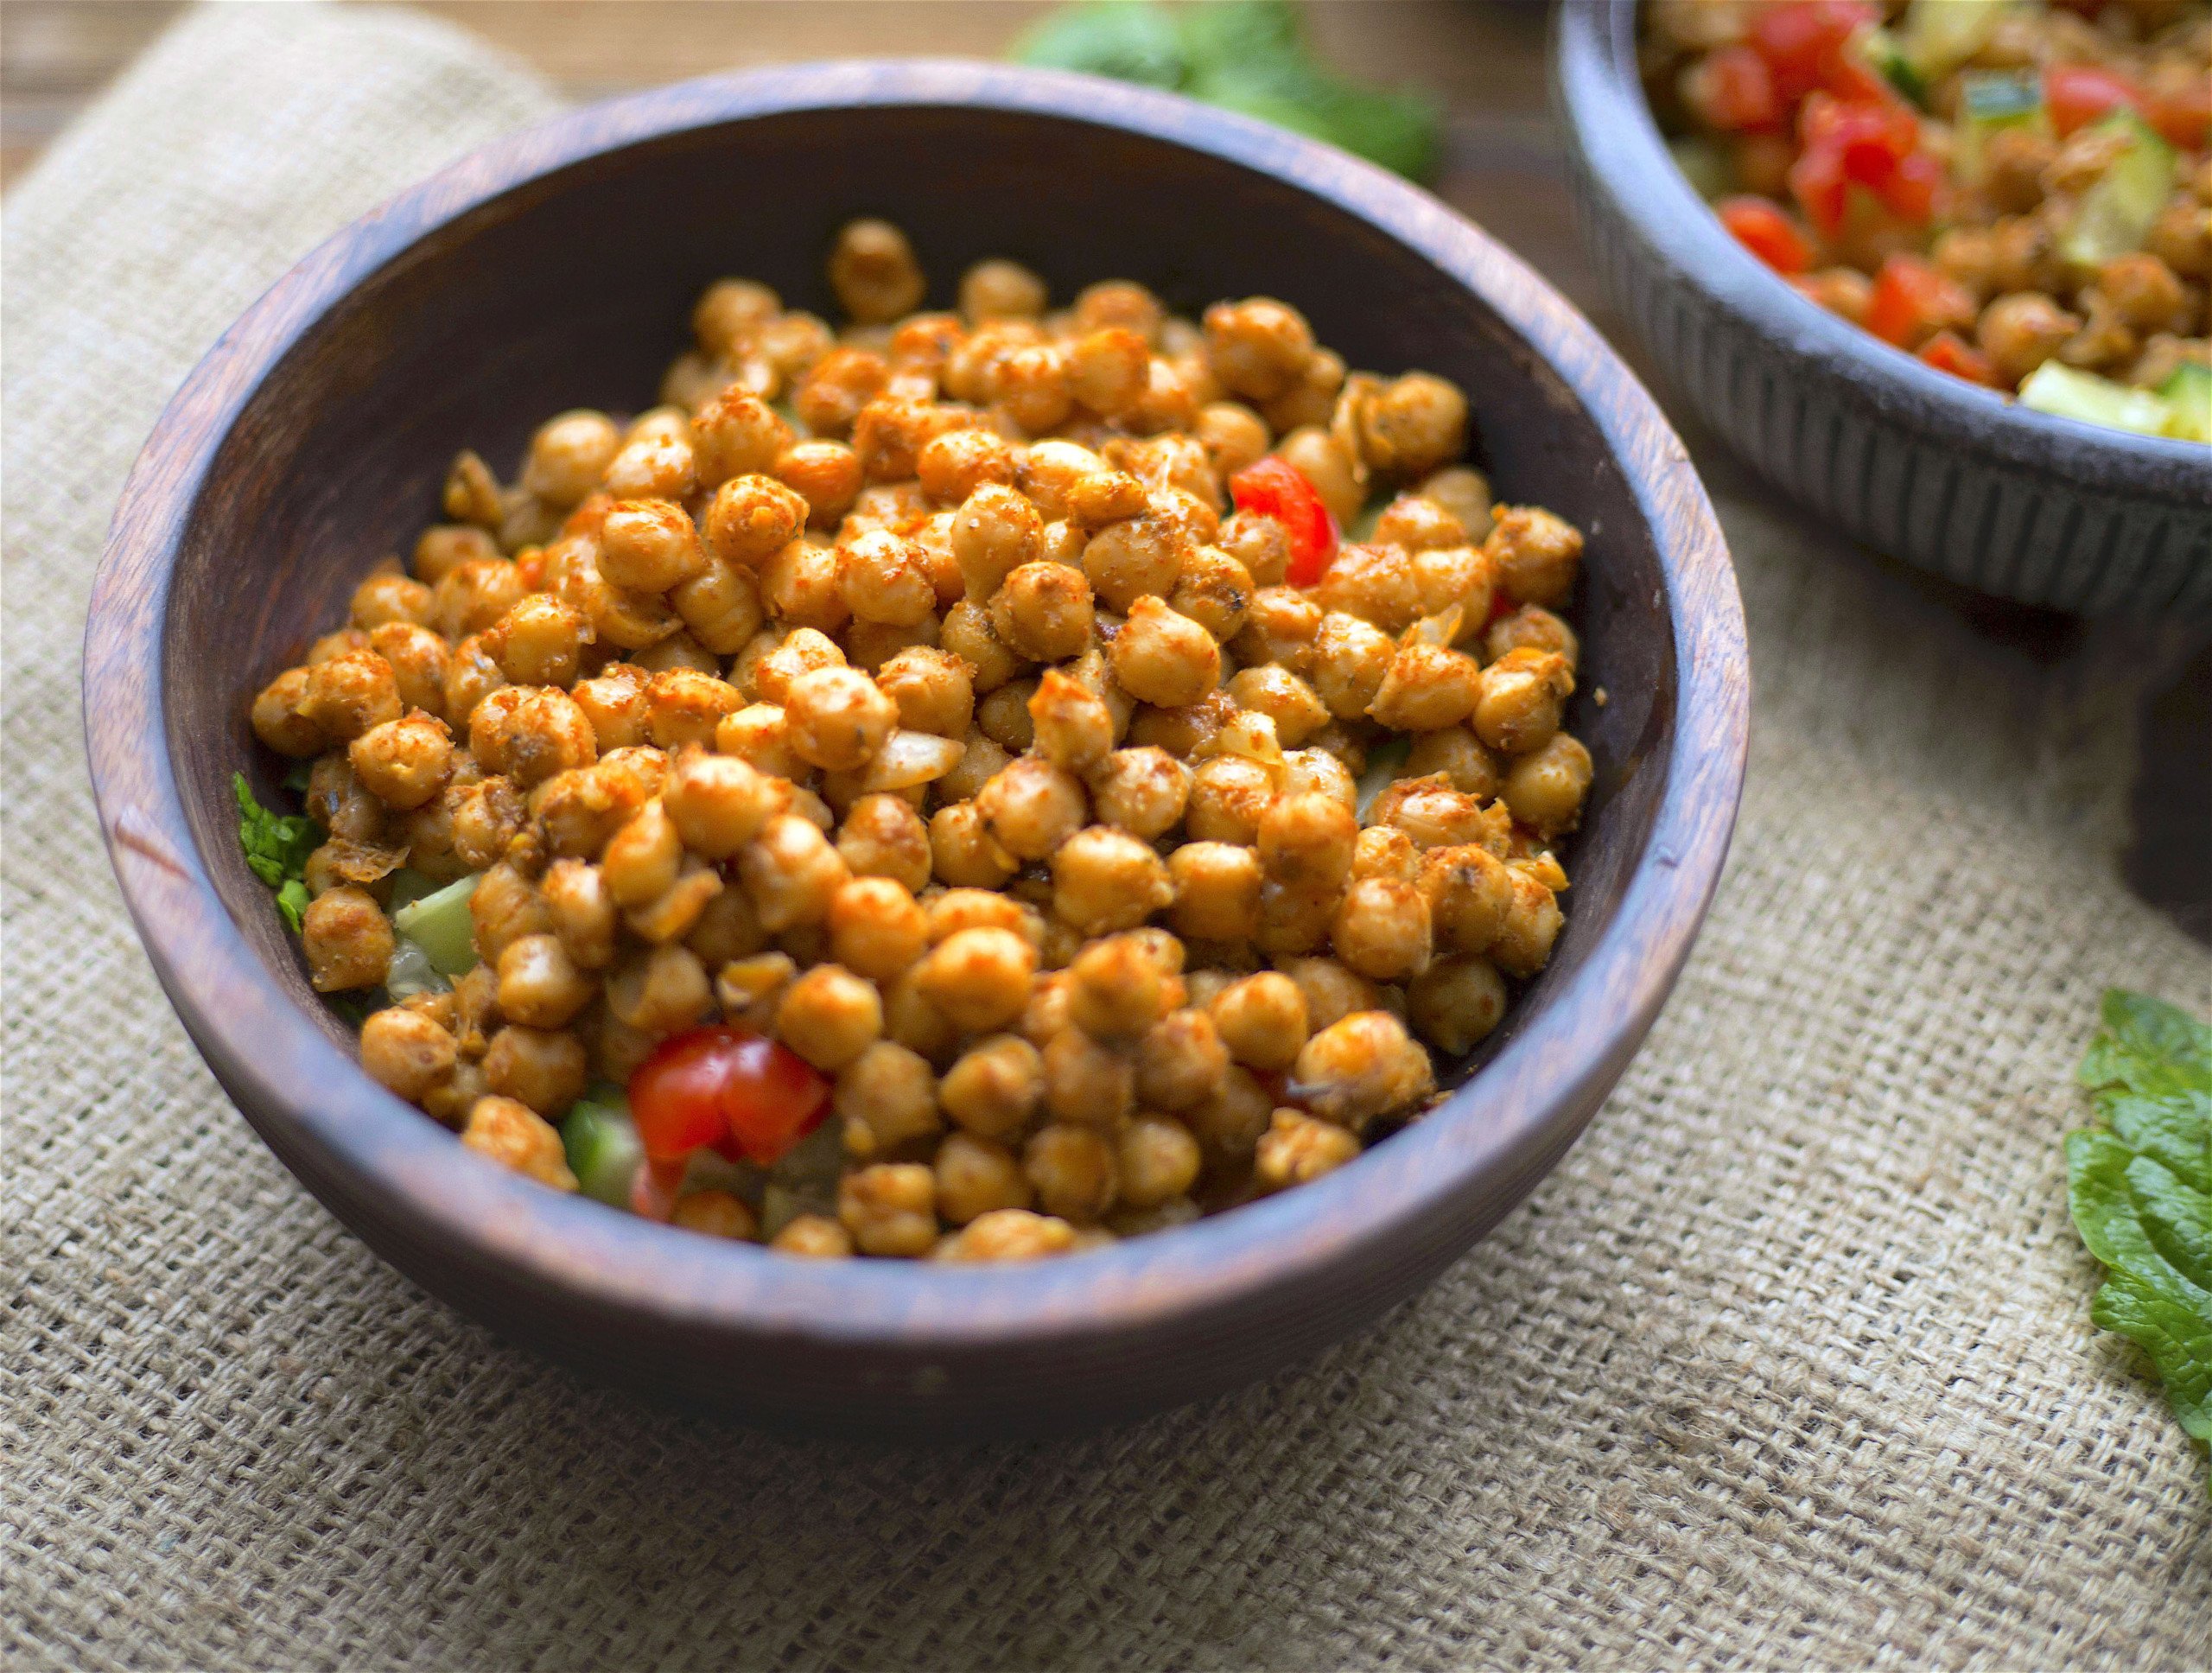 Two bowls with spiced chickpeas on a bed of salad